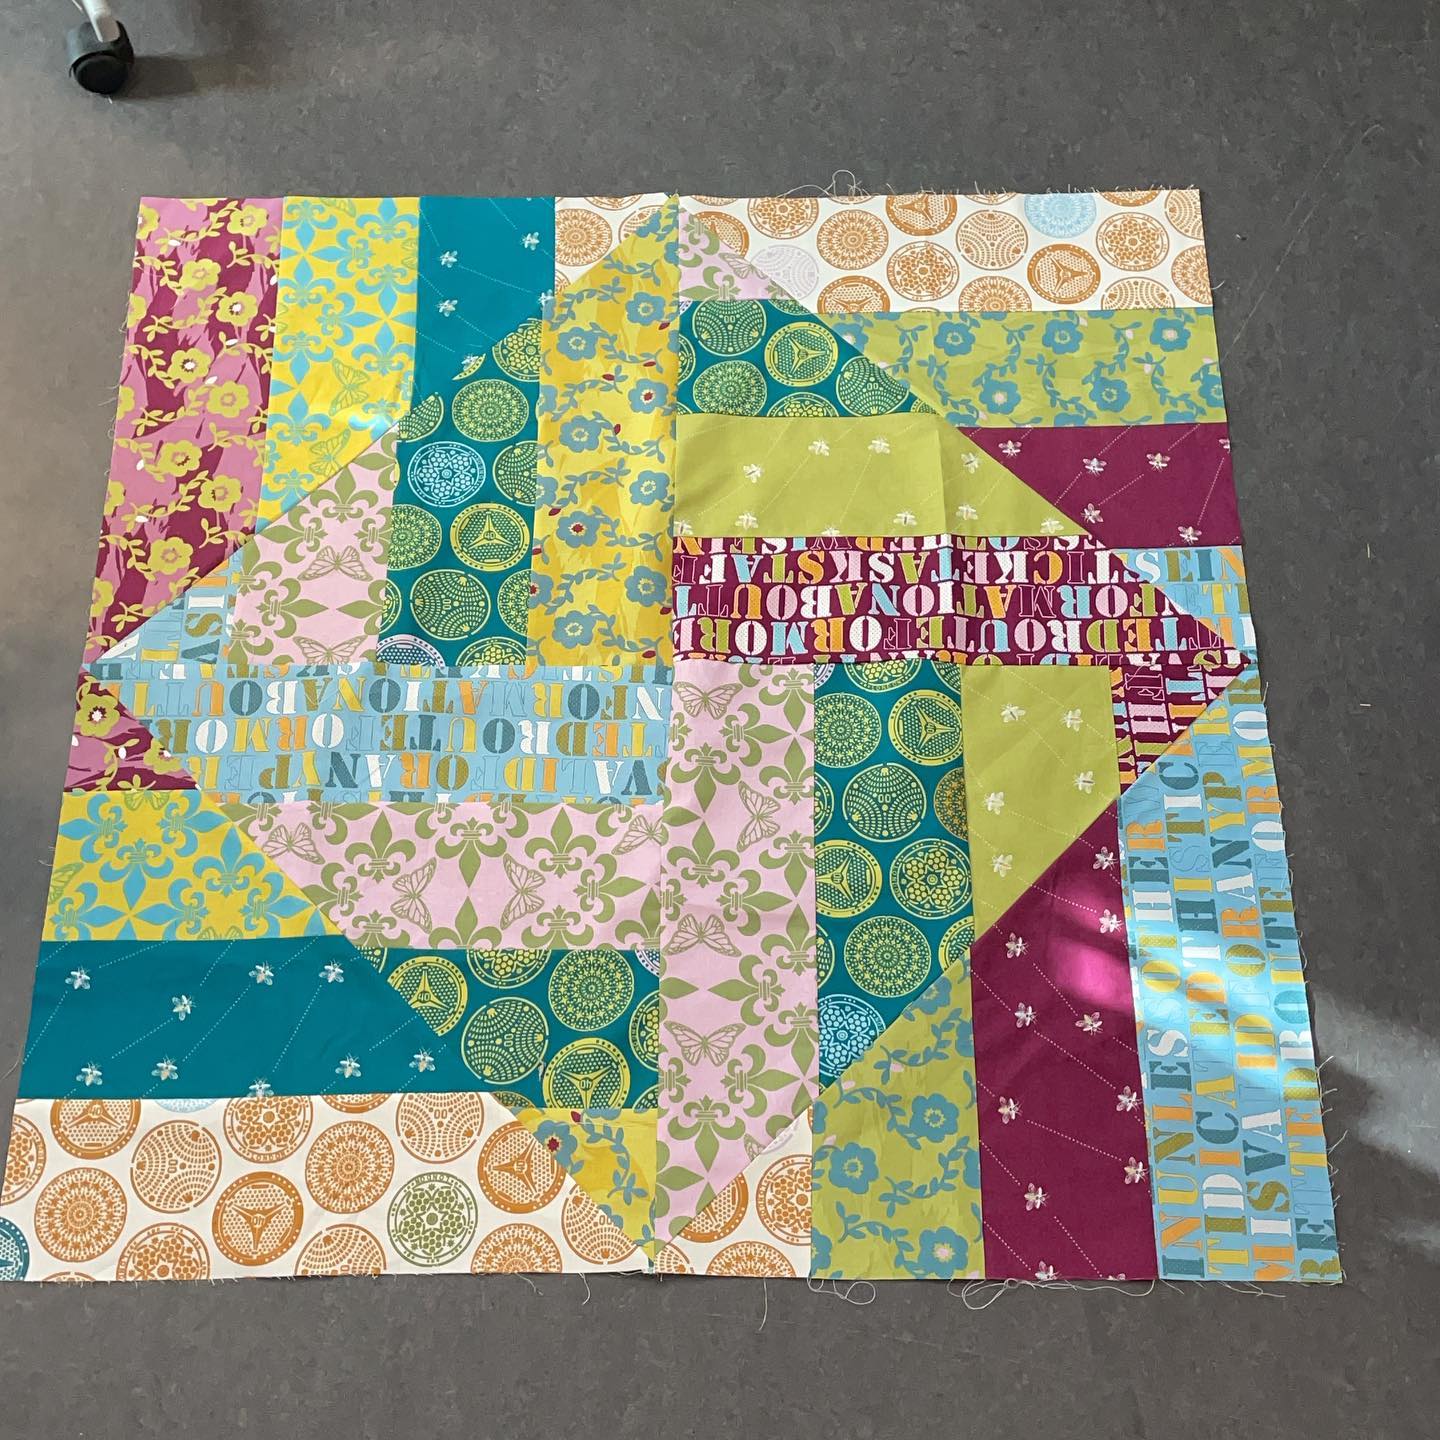 And now a lap quilt using my Wanderlust line from Kokka. What’s gotten into me????